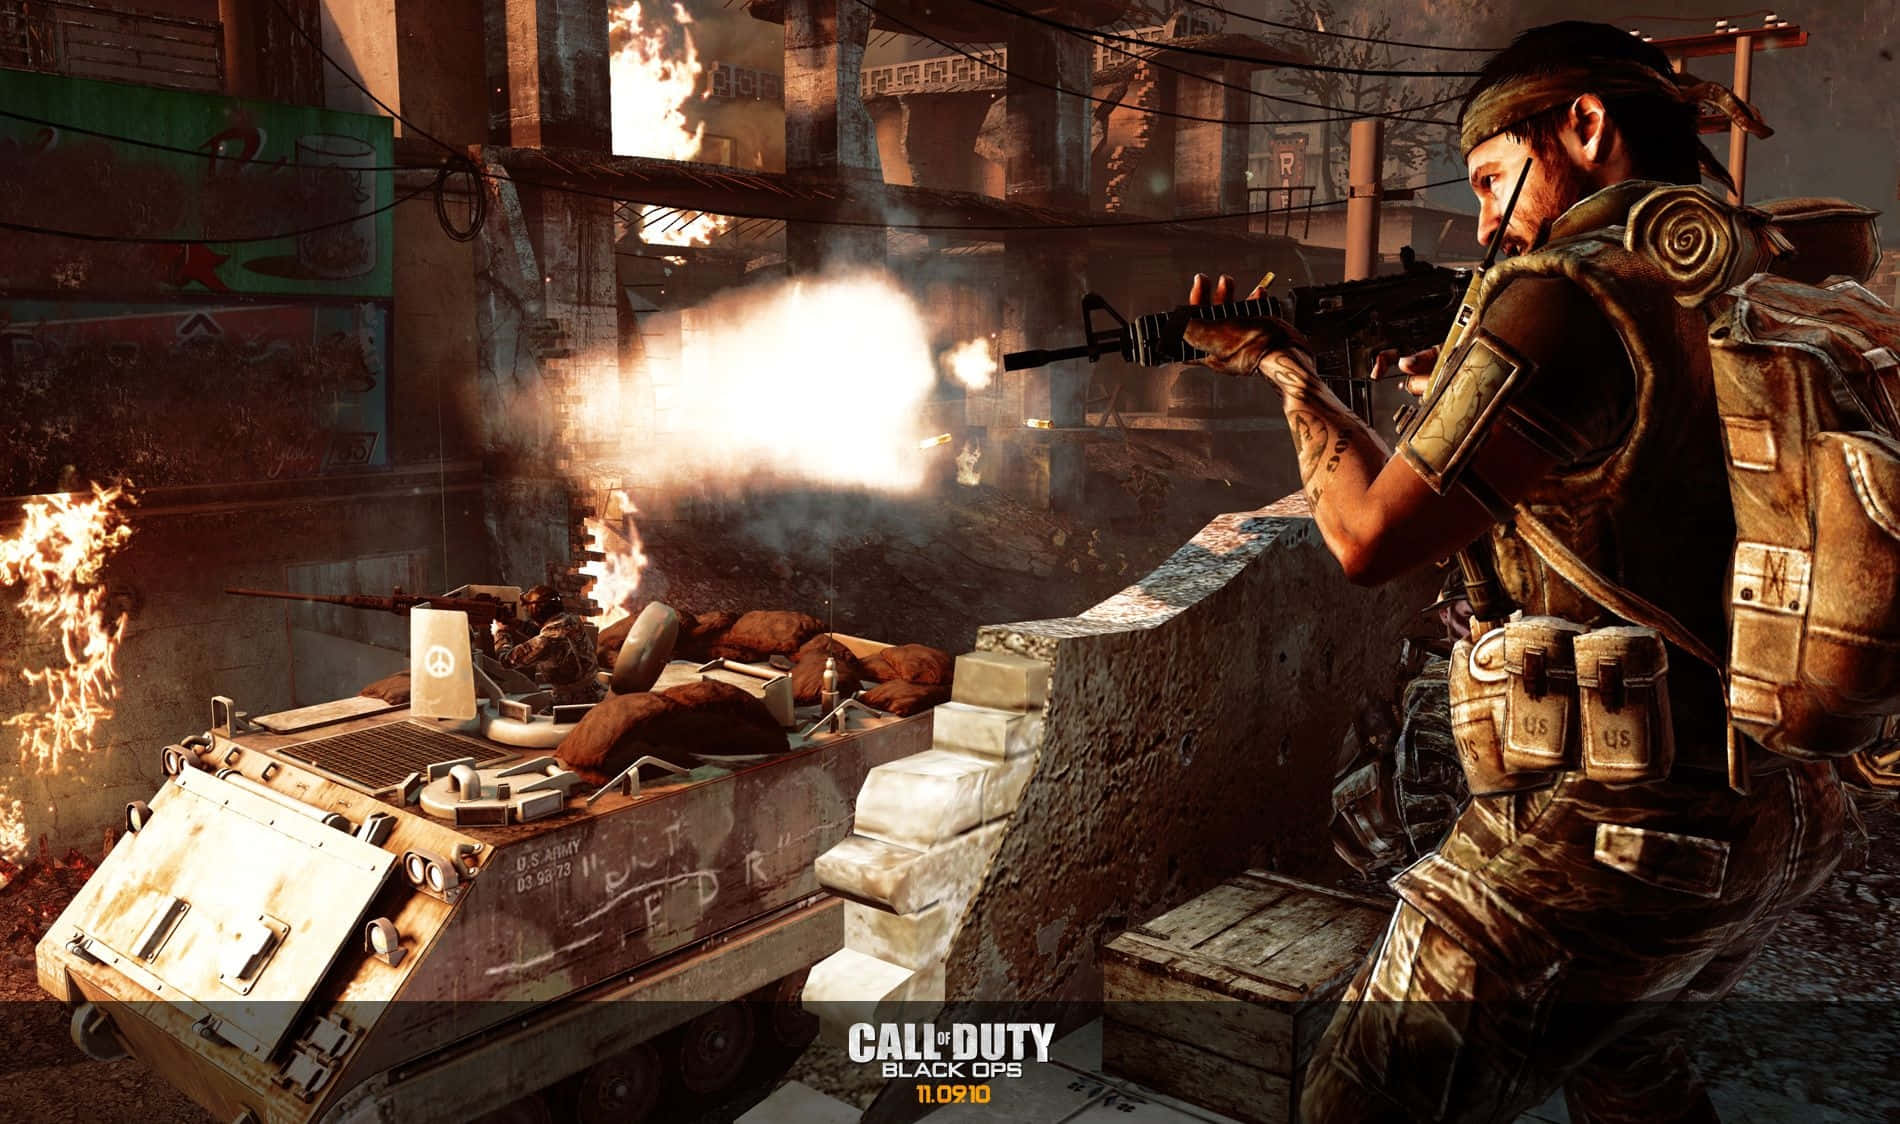 Prove your skill on the battlefield in Call of Duty Black Ops! Wallpaper